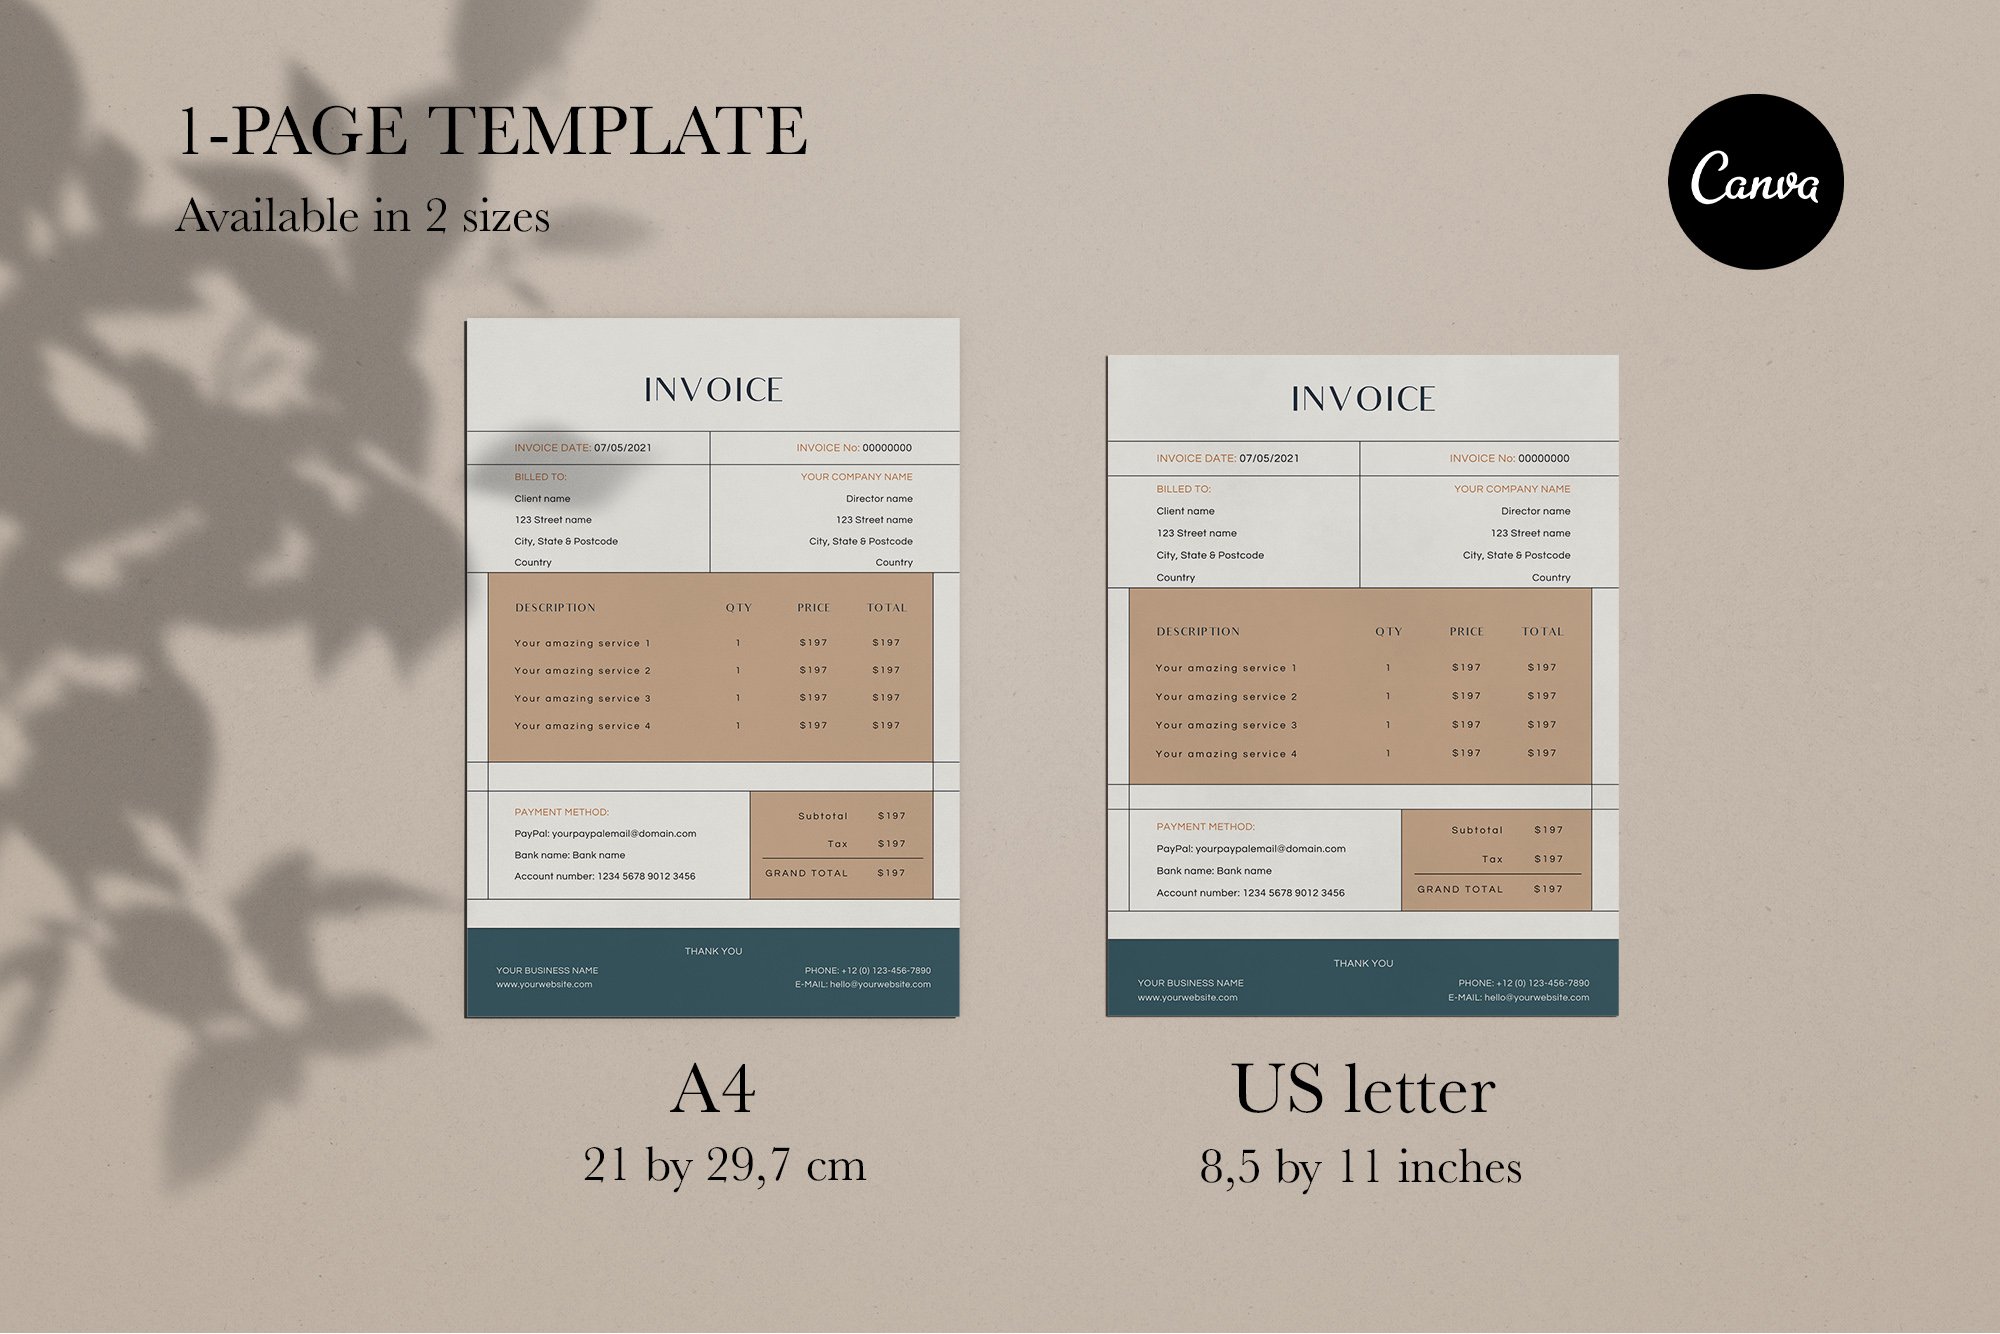 Invoice Canva Template | ABIGAIL preview image.